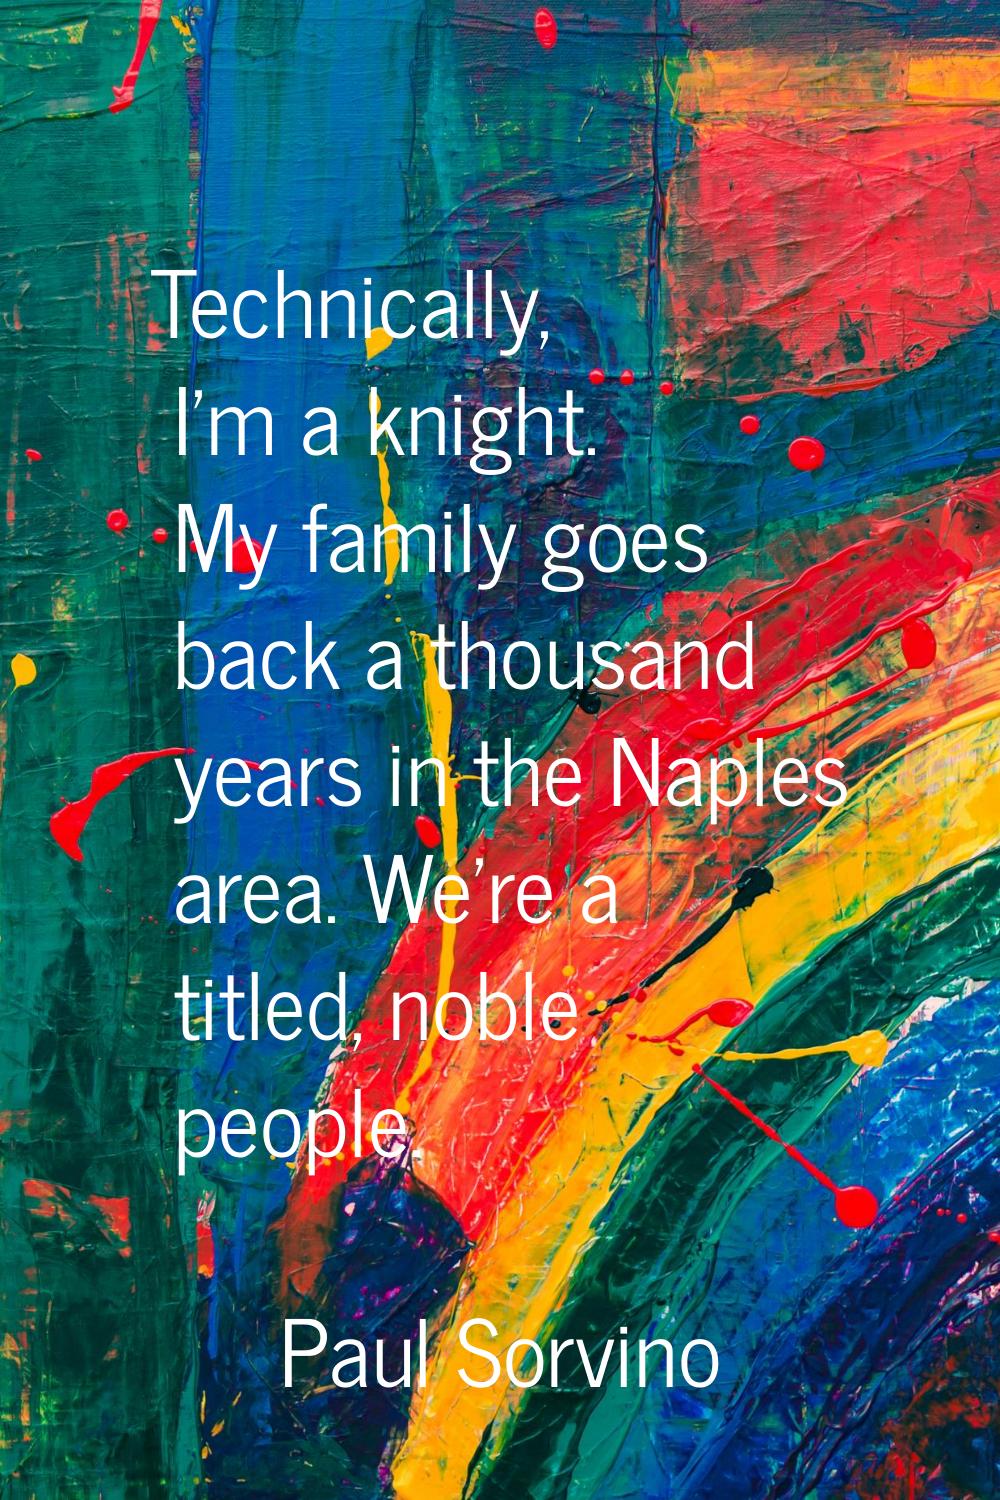 Technically, I'm a knight. My family goes back a thousand years in the Naples area. We're a titled,